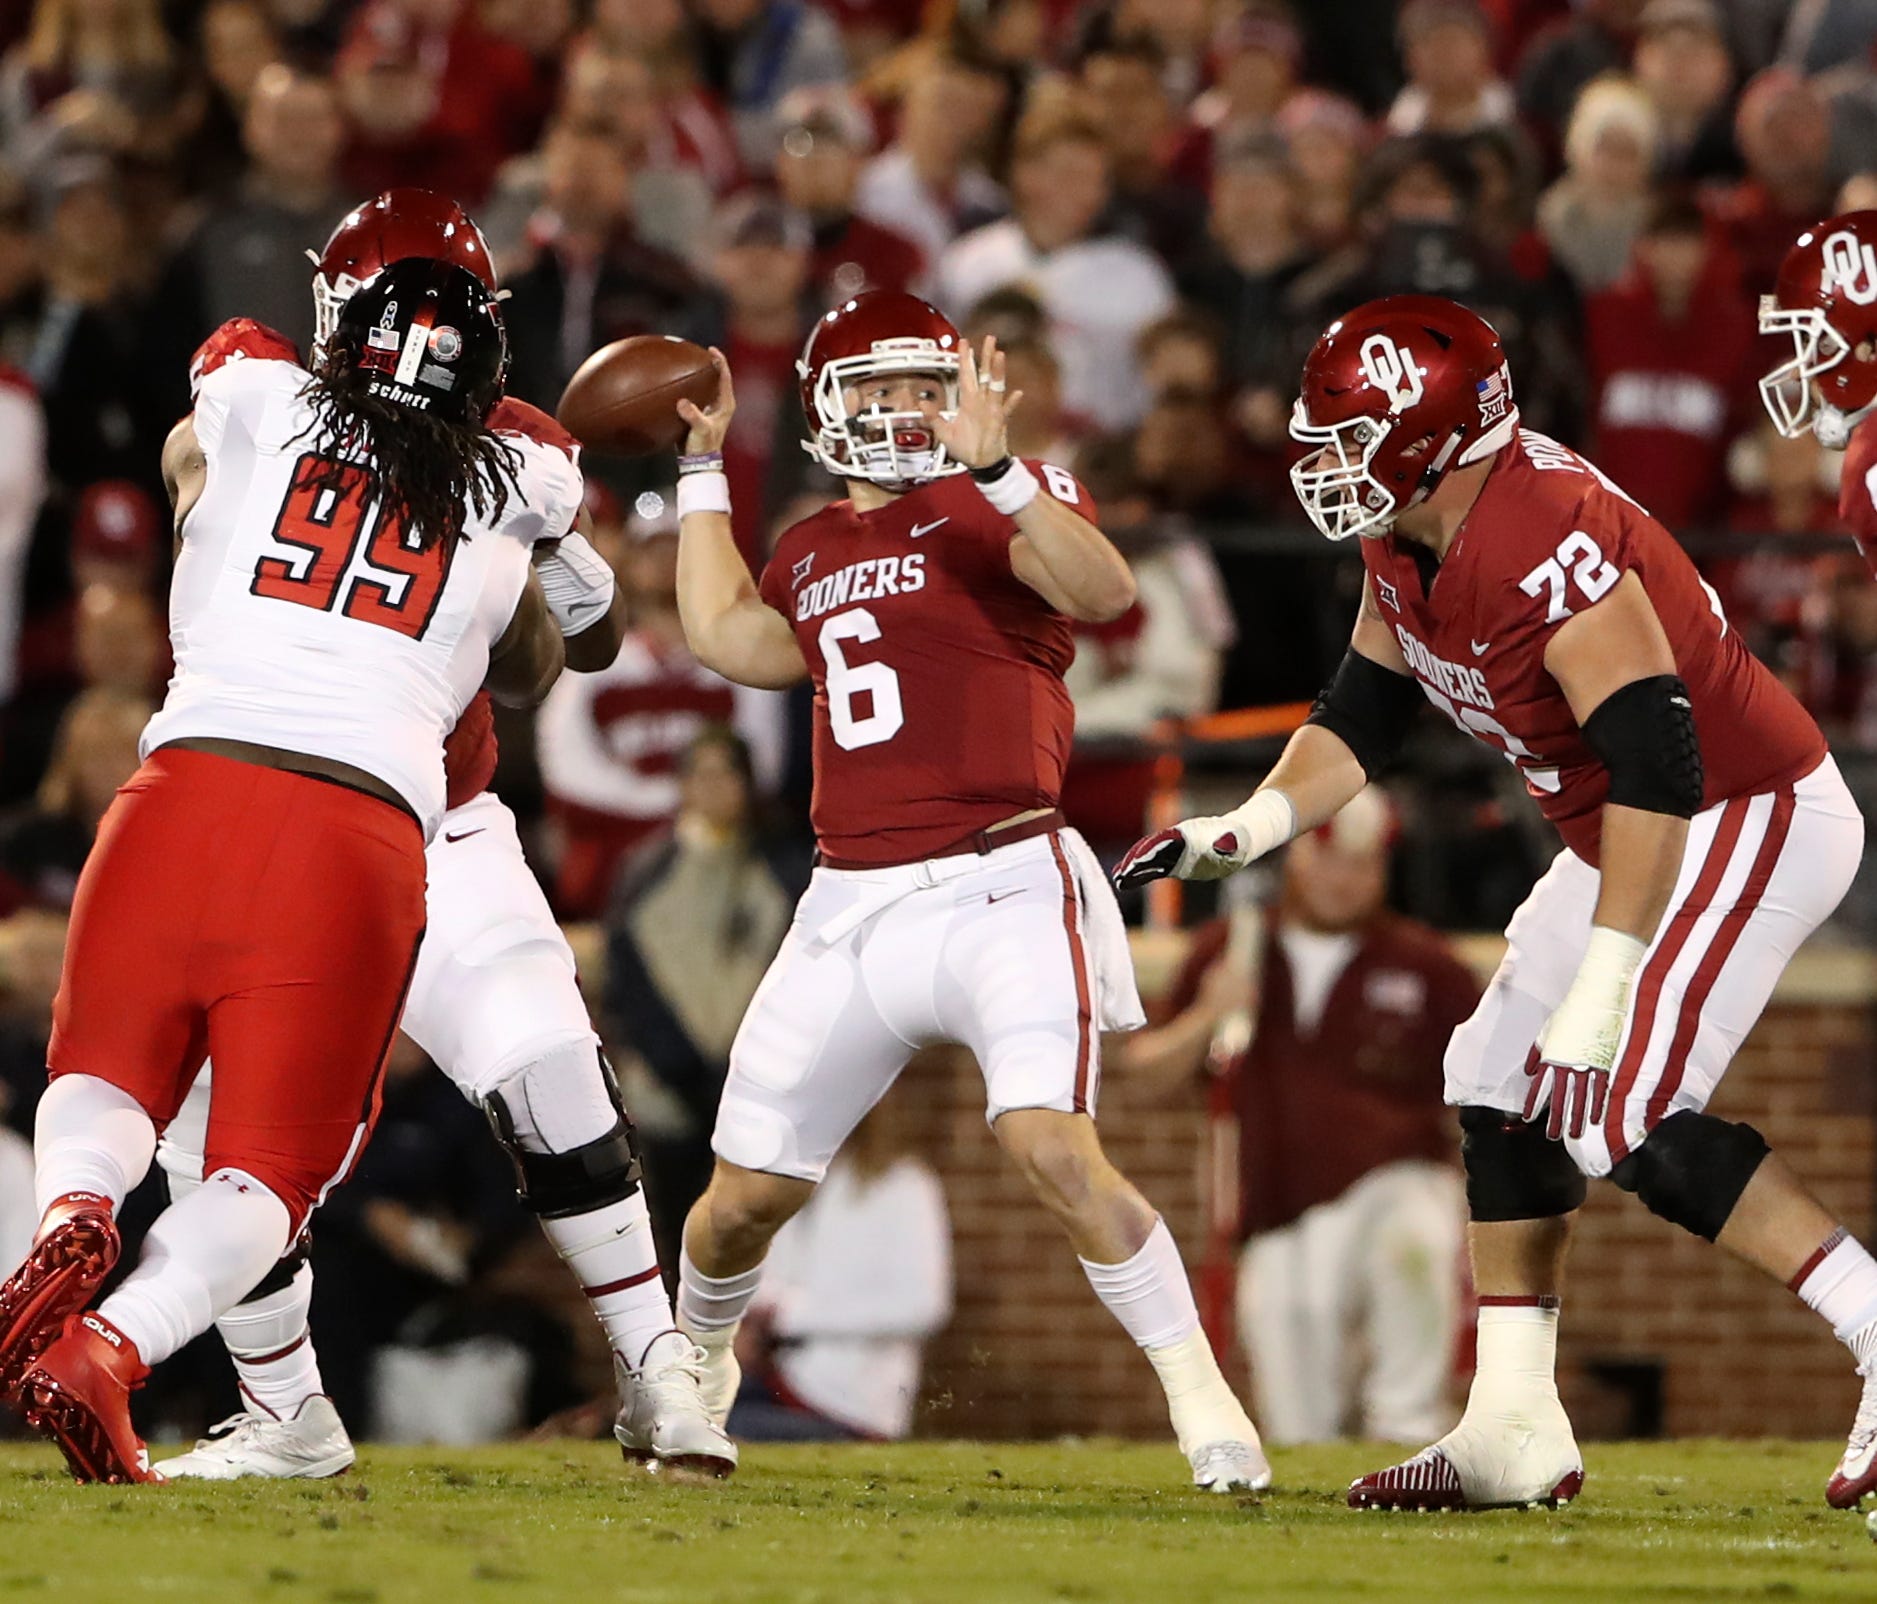 Oklahoma quarterback Baker Mayfield throws during the first quarter against Texas Tech.